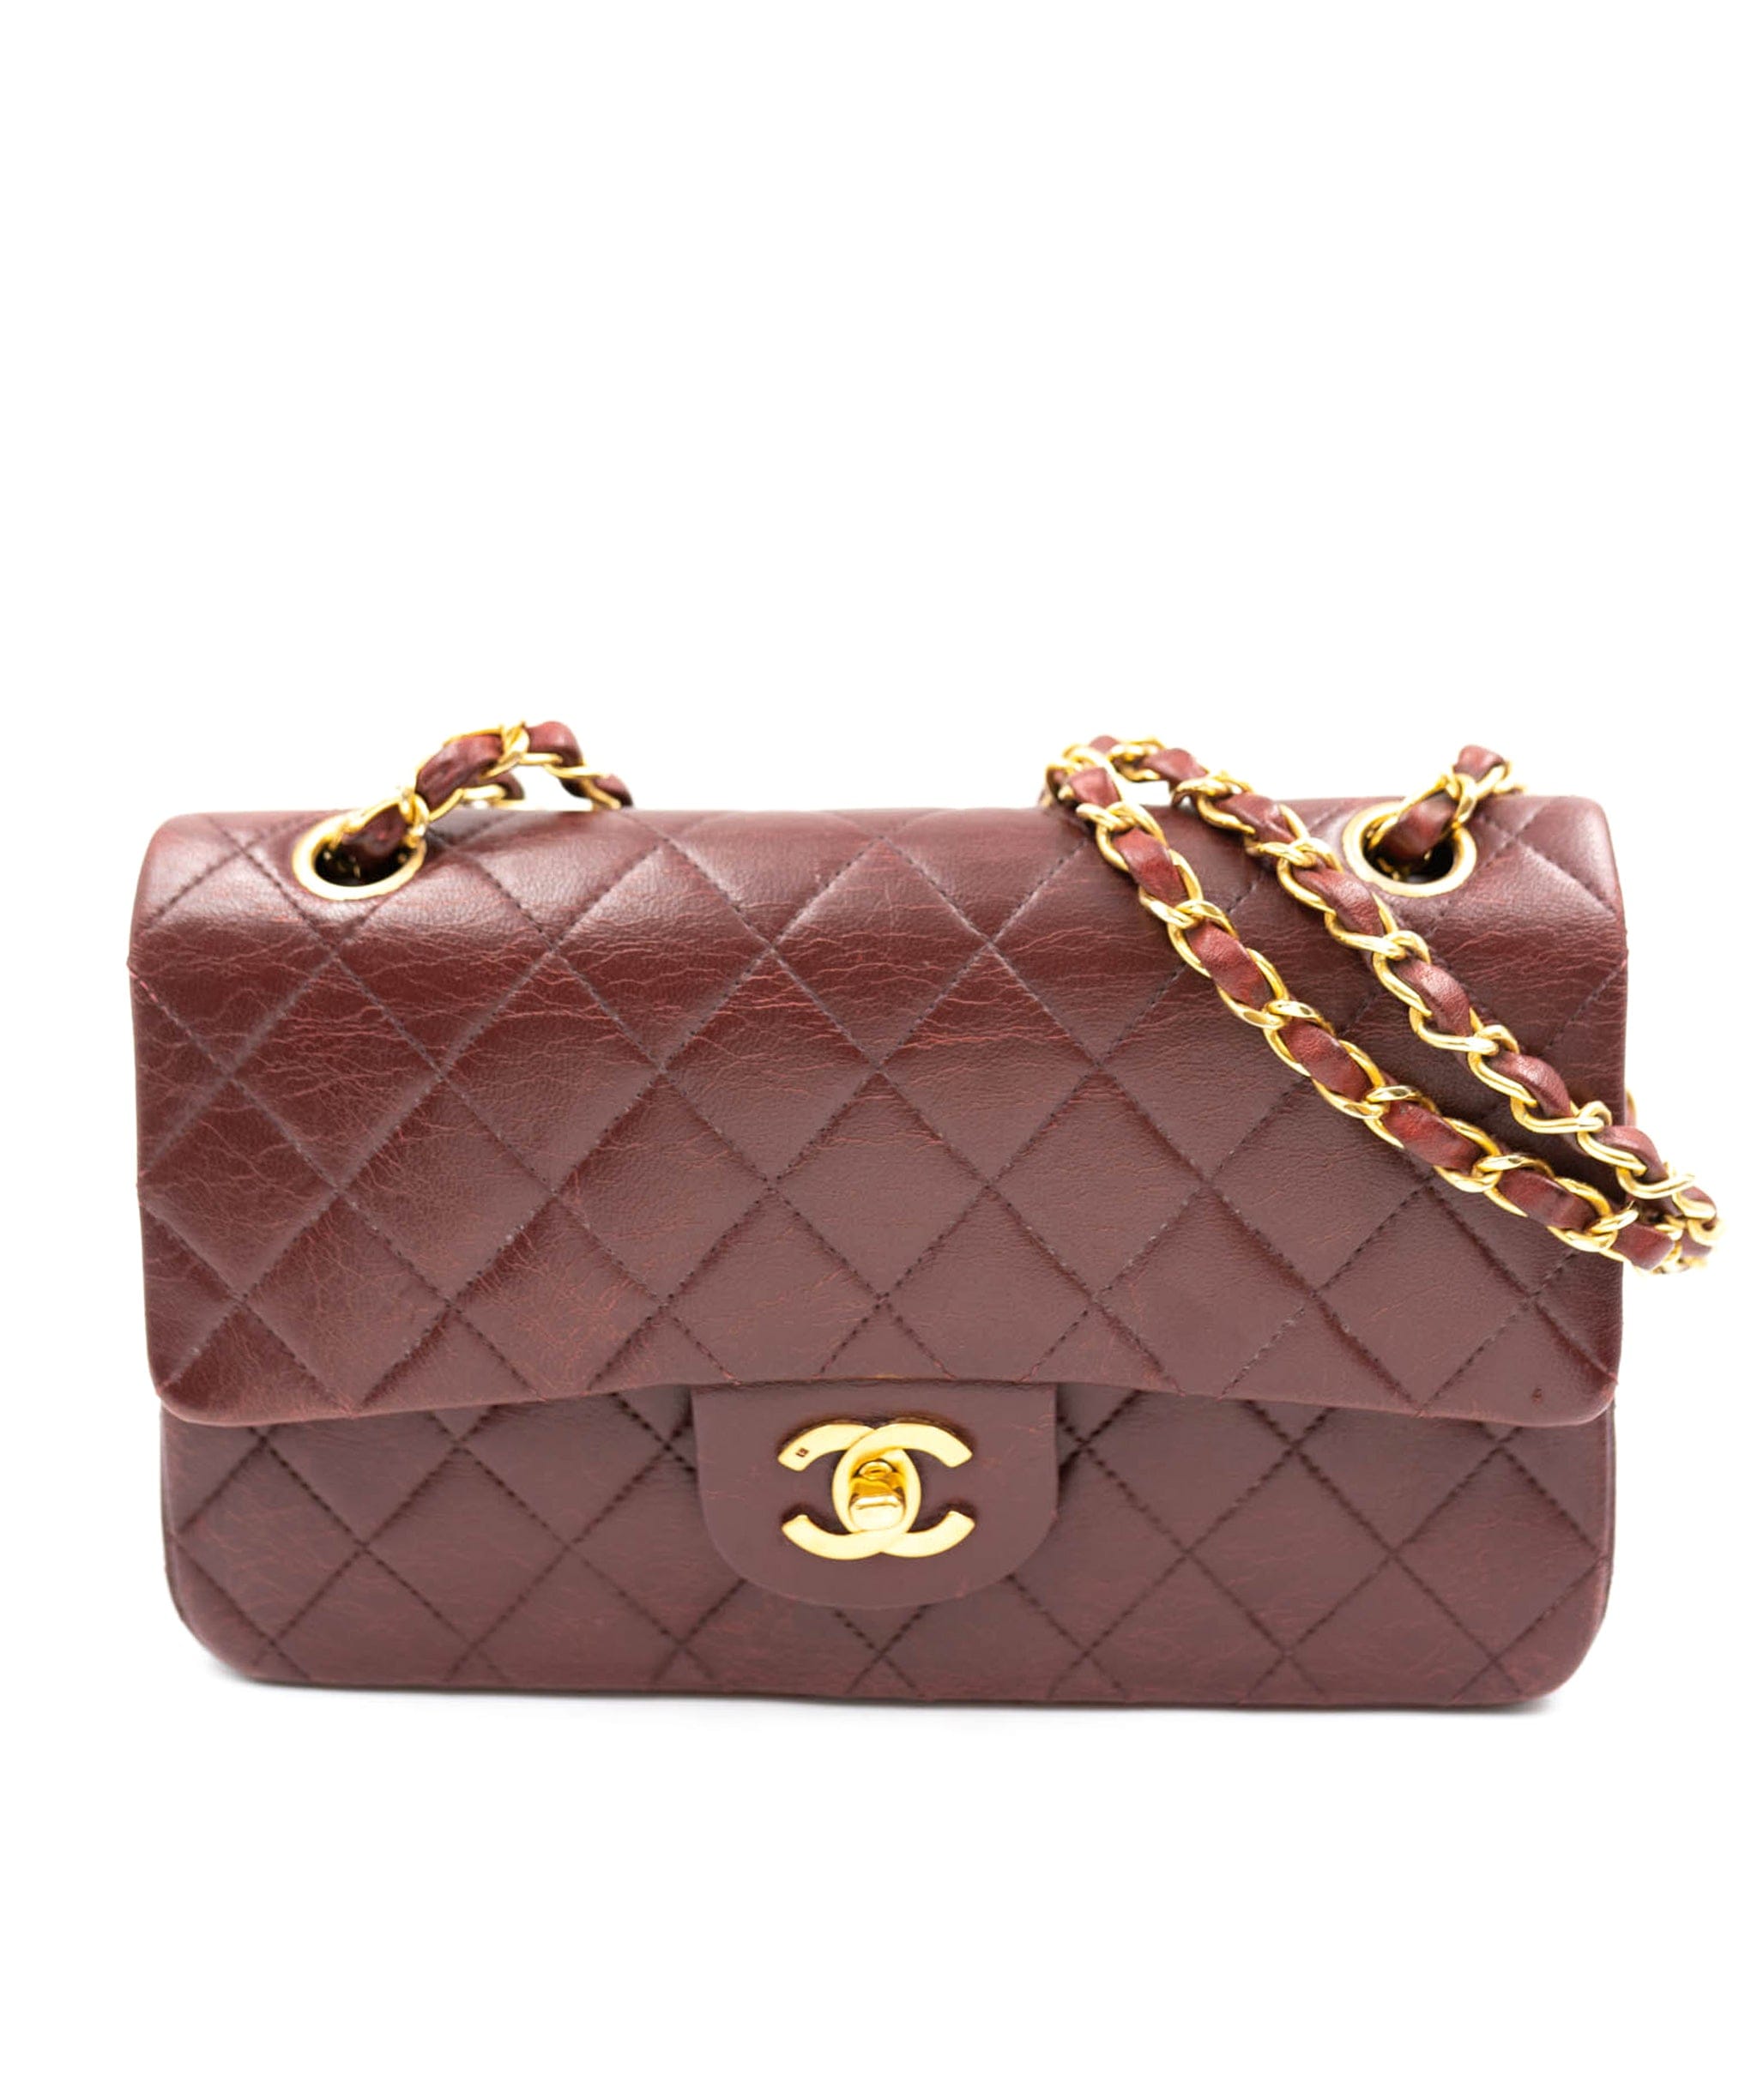 NEW in BOX Authentic CHANEL Small Flap Bag Burgundy AS4012 B10669